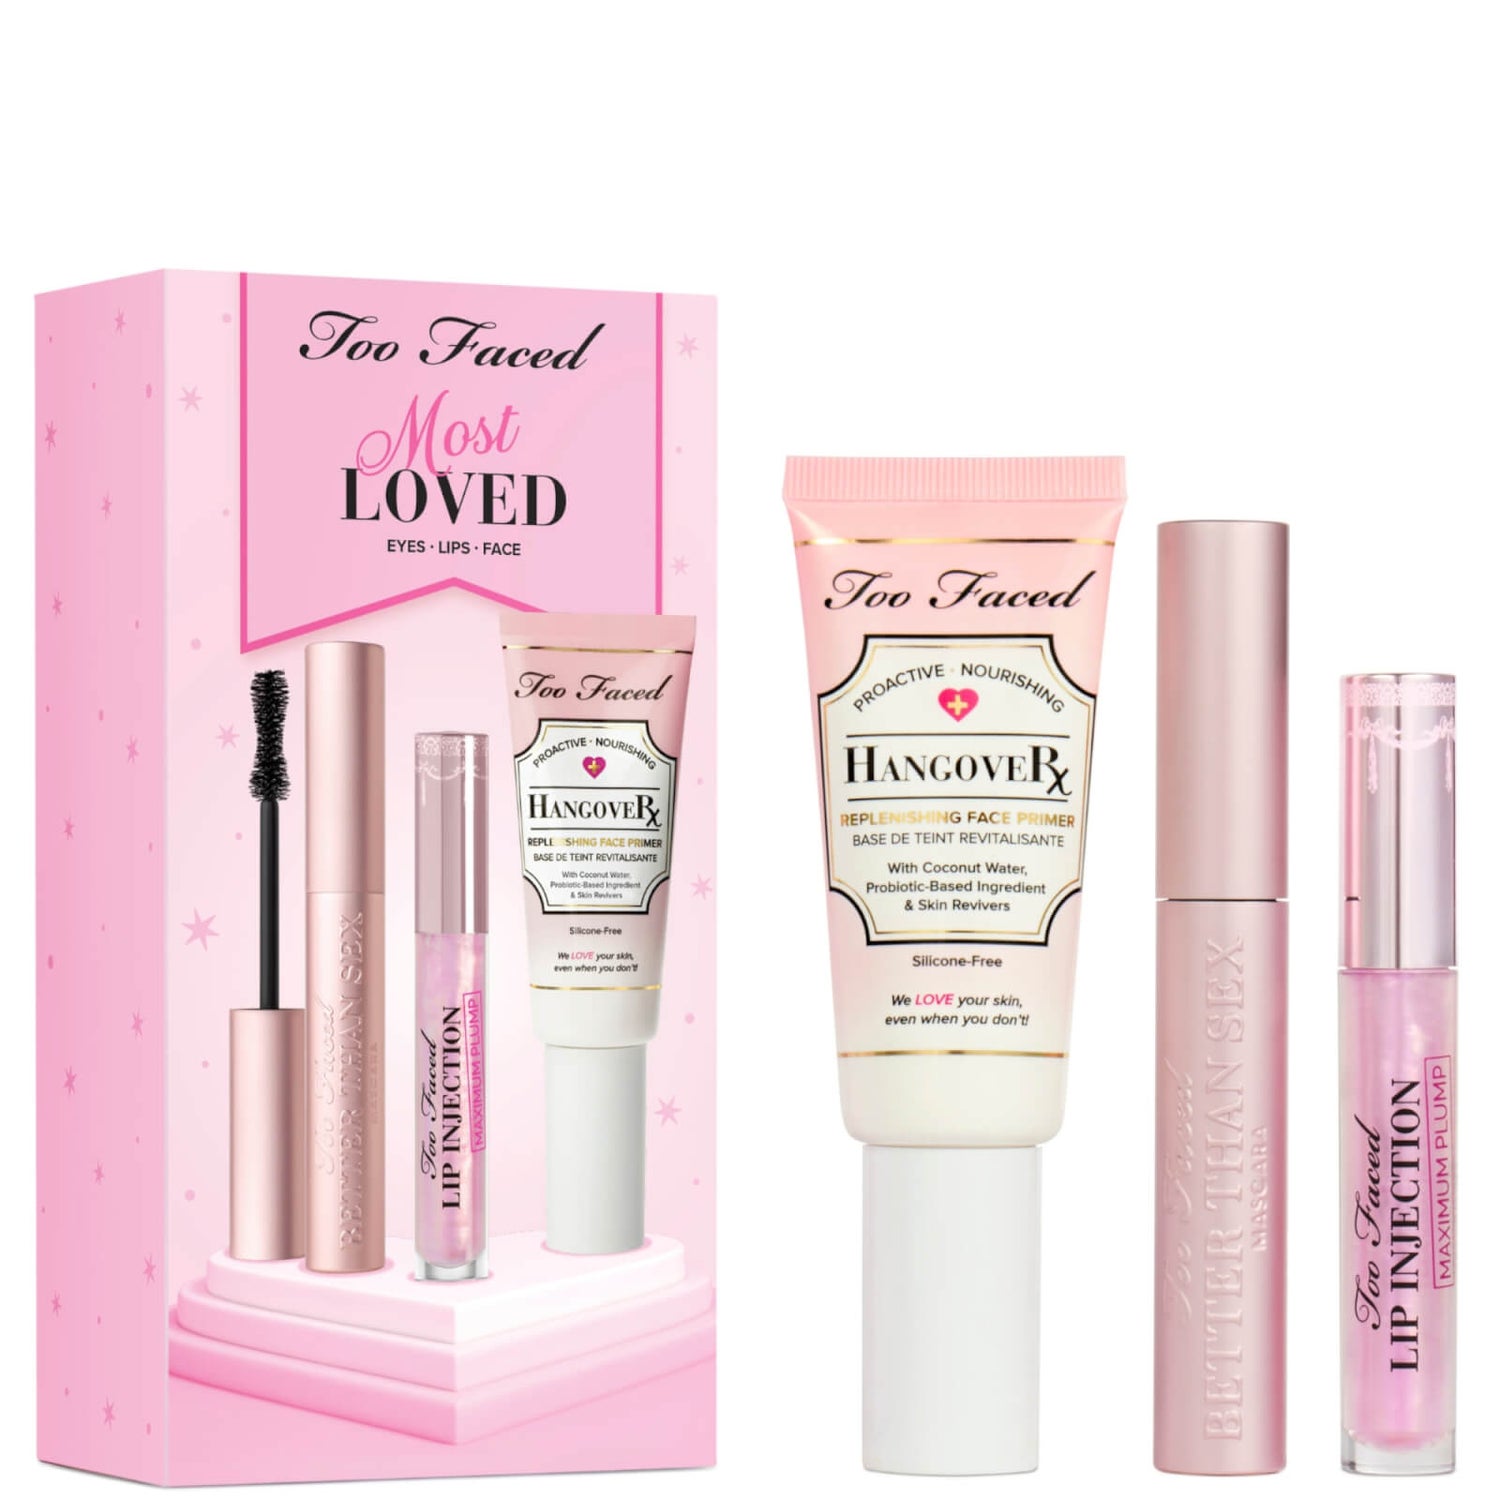 Too Faced Most Loved Set (Worth £80.50)